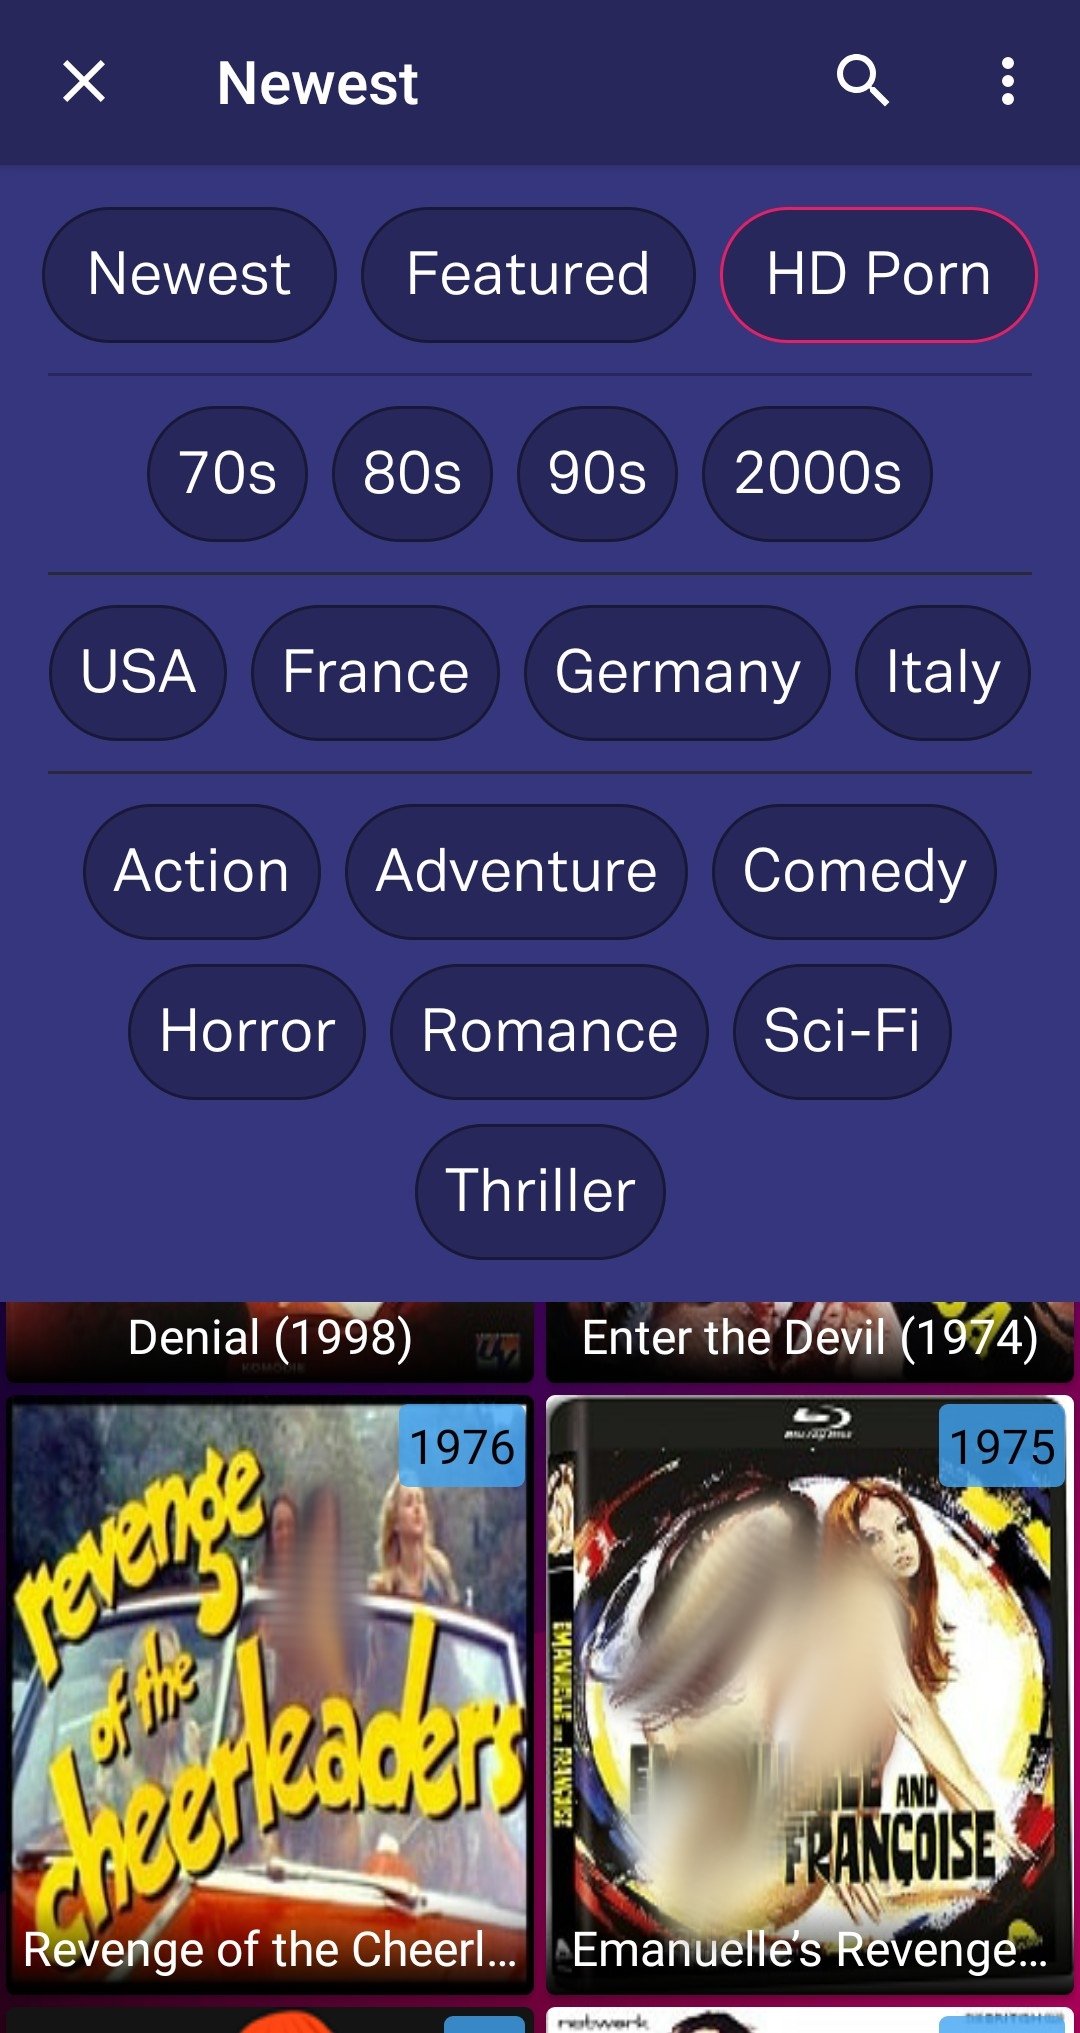 Android Hd Porn App Download - EroFlix 6.7 - Download for Android APK Free